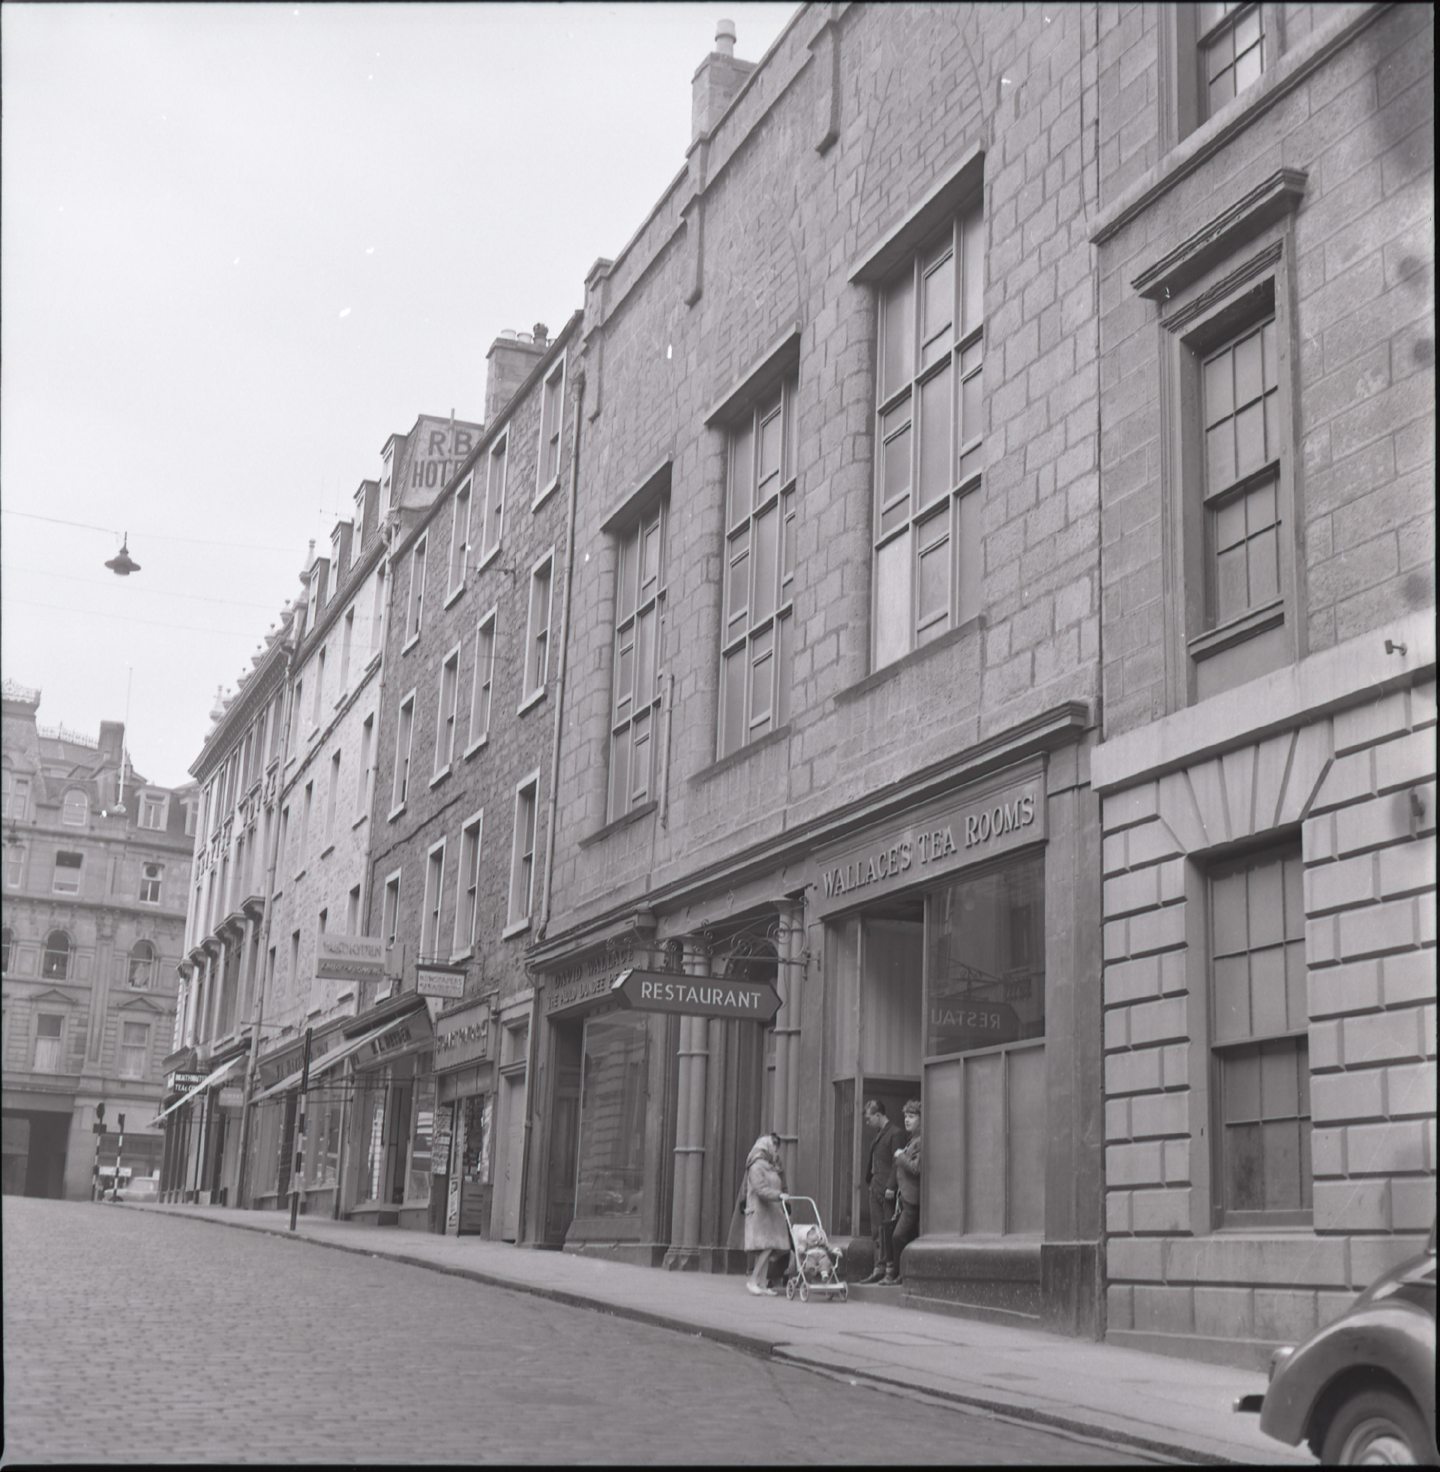 The Auld Dundee Pie Shop in 1965.